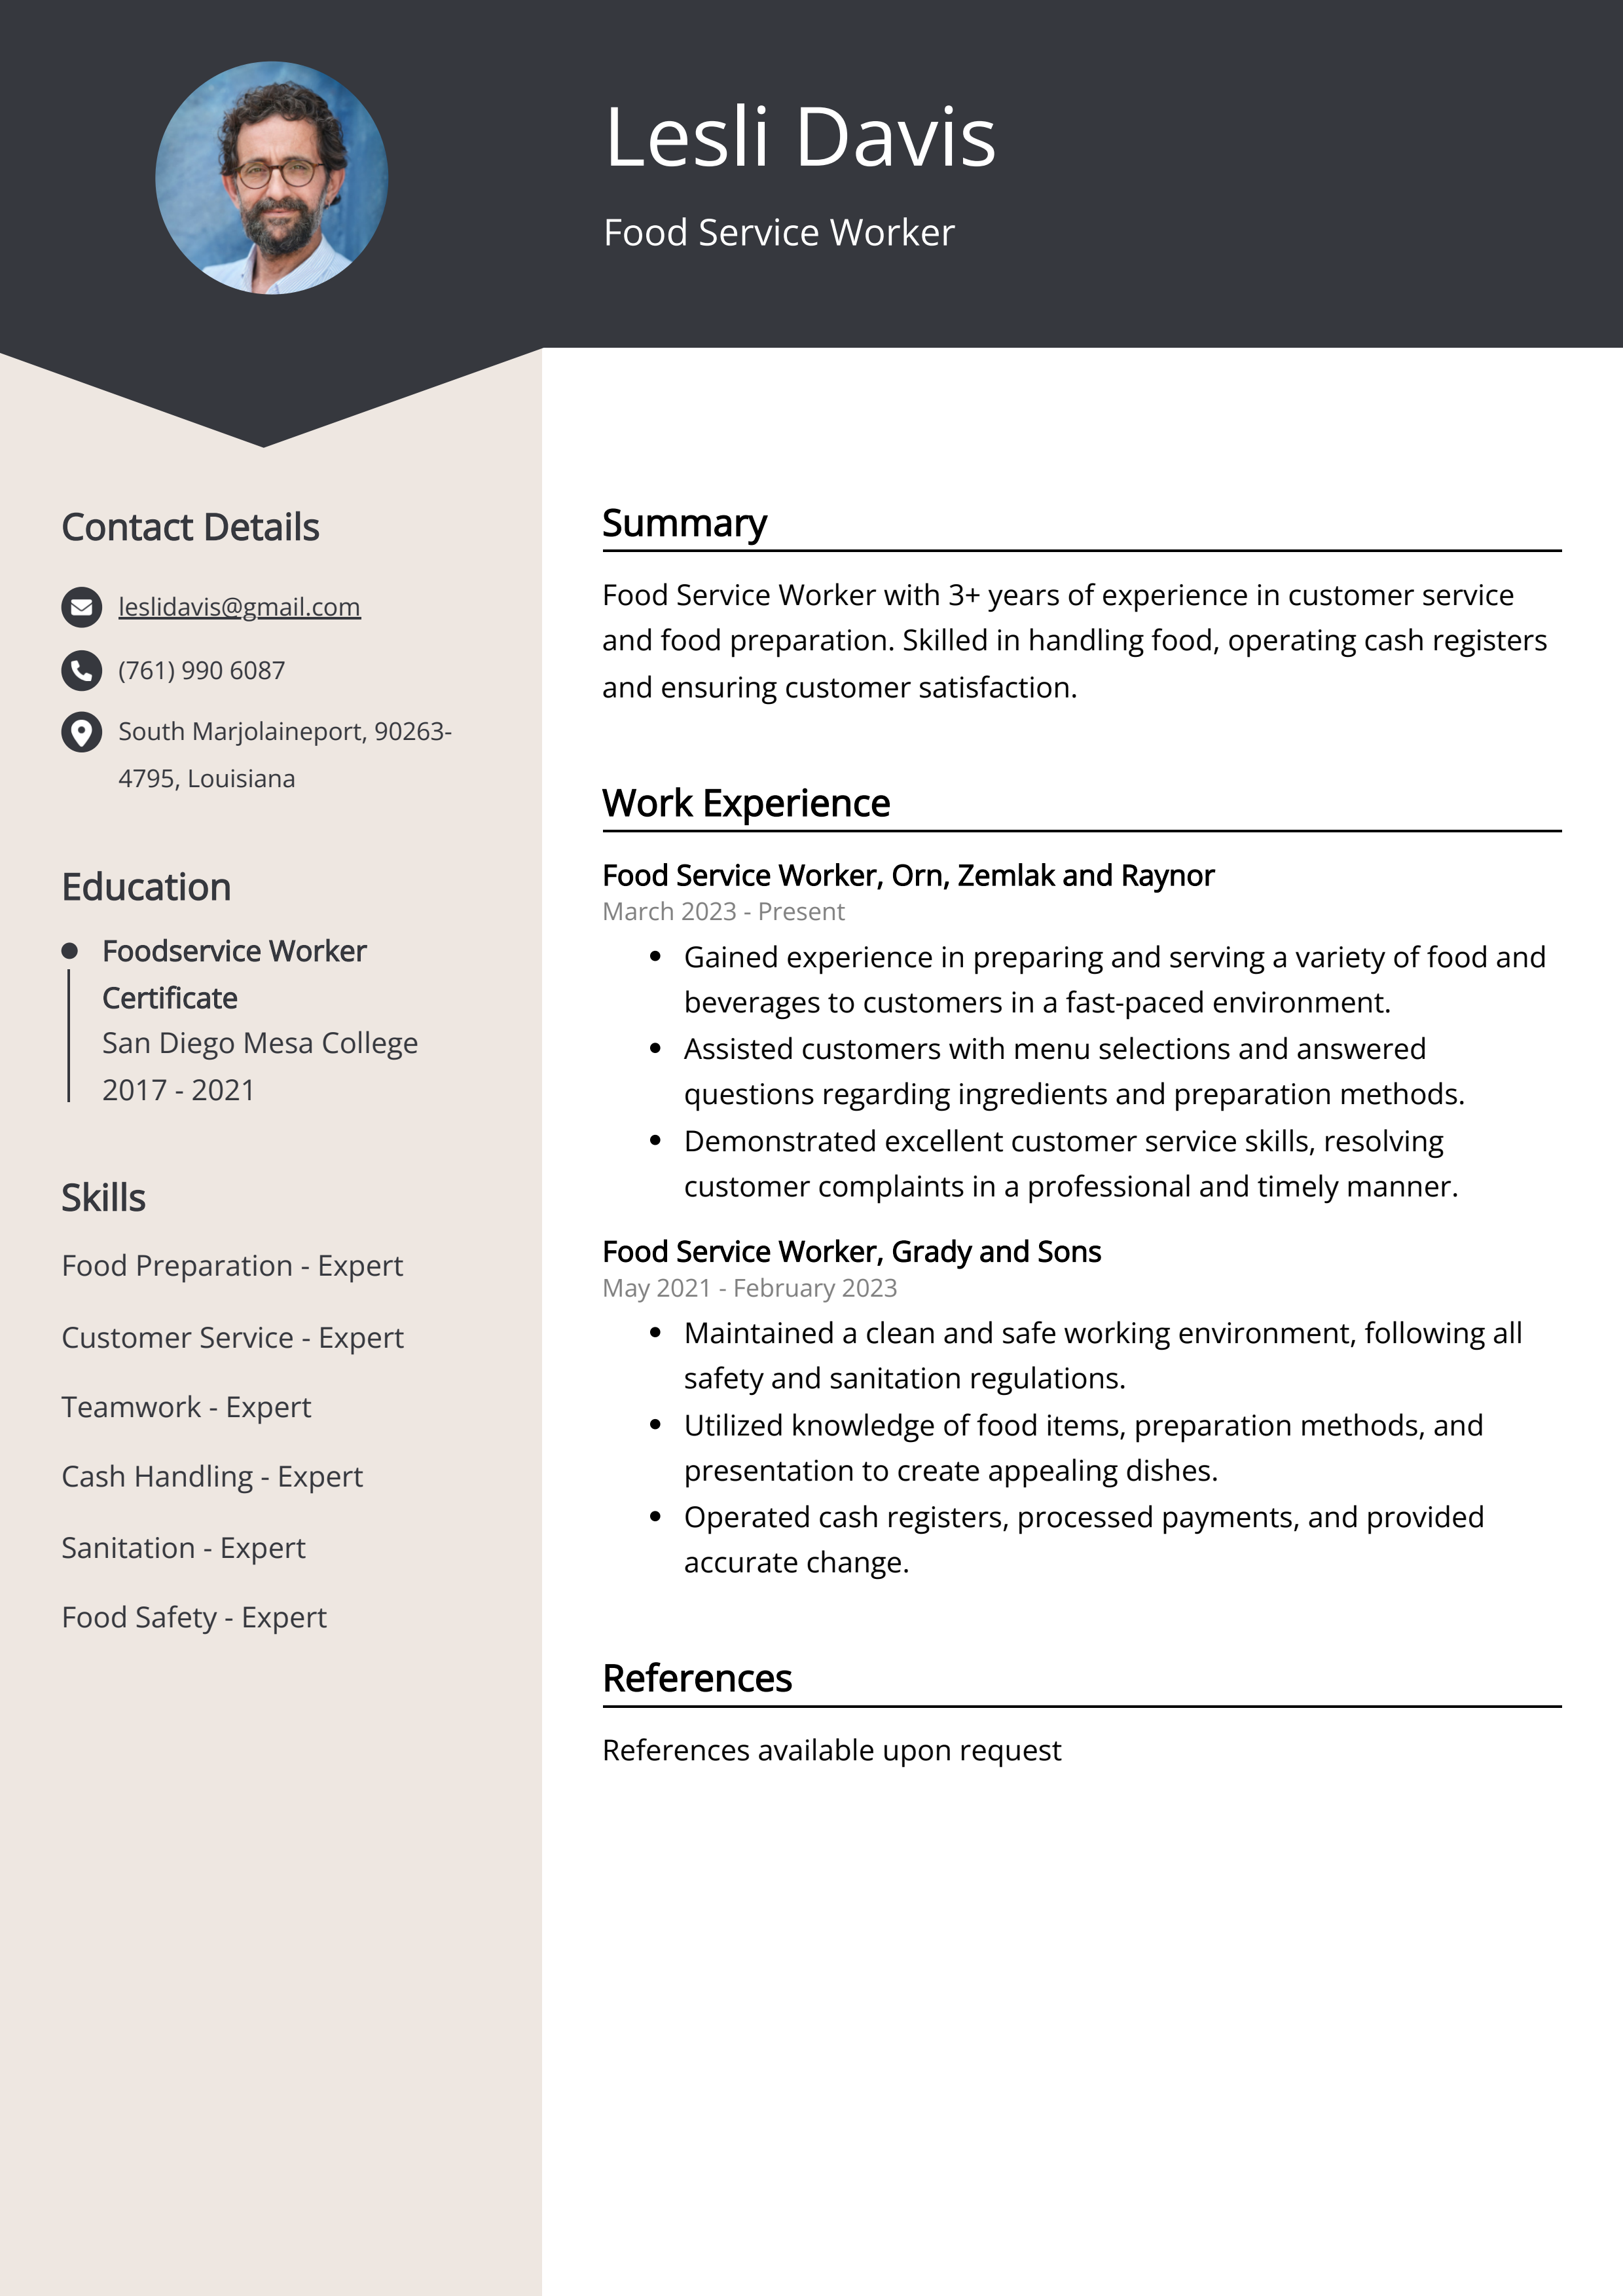 Food Service Worker CV Example